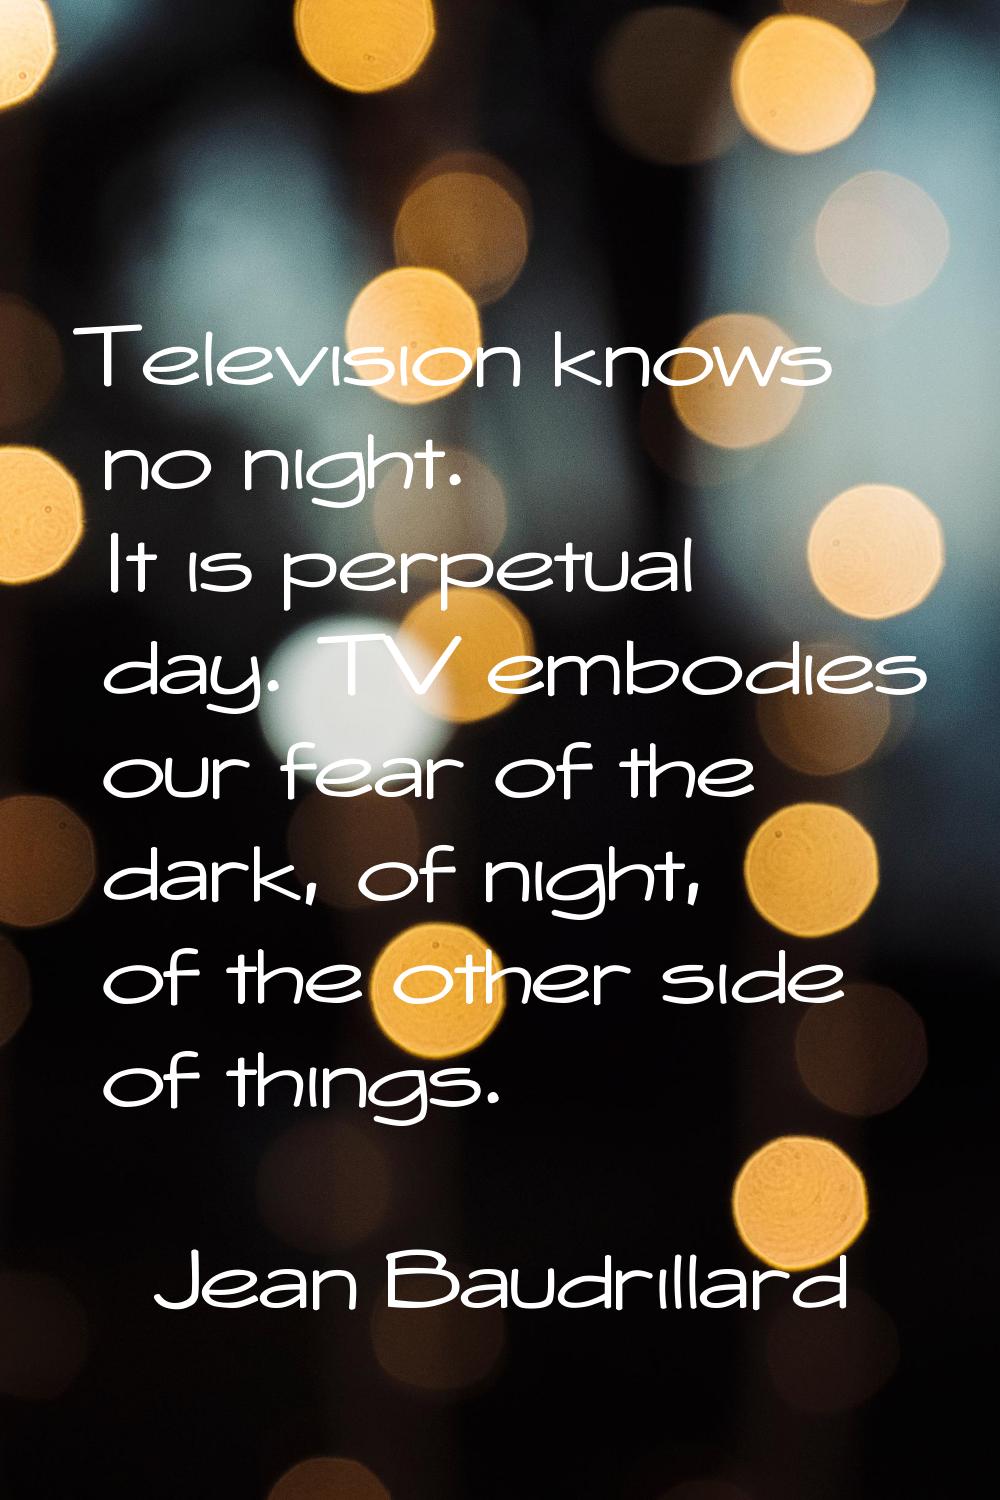 Television knows no night. It is perpetual day. TV embodies our fear of the dark, of night, of the 